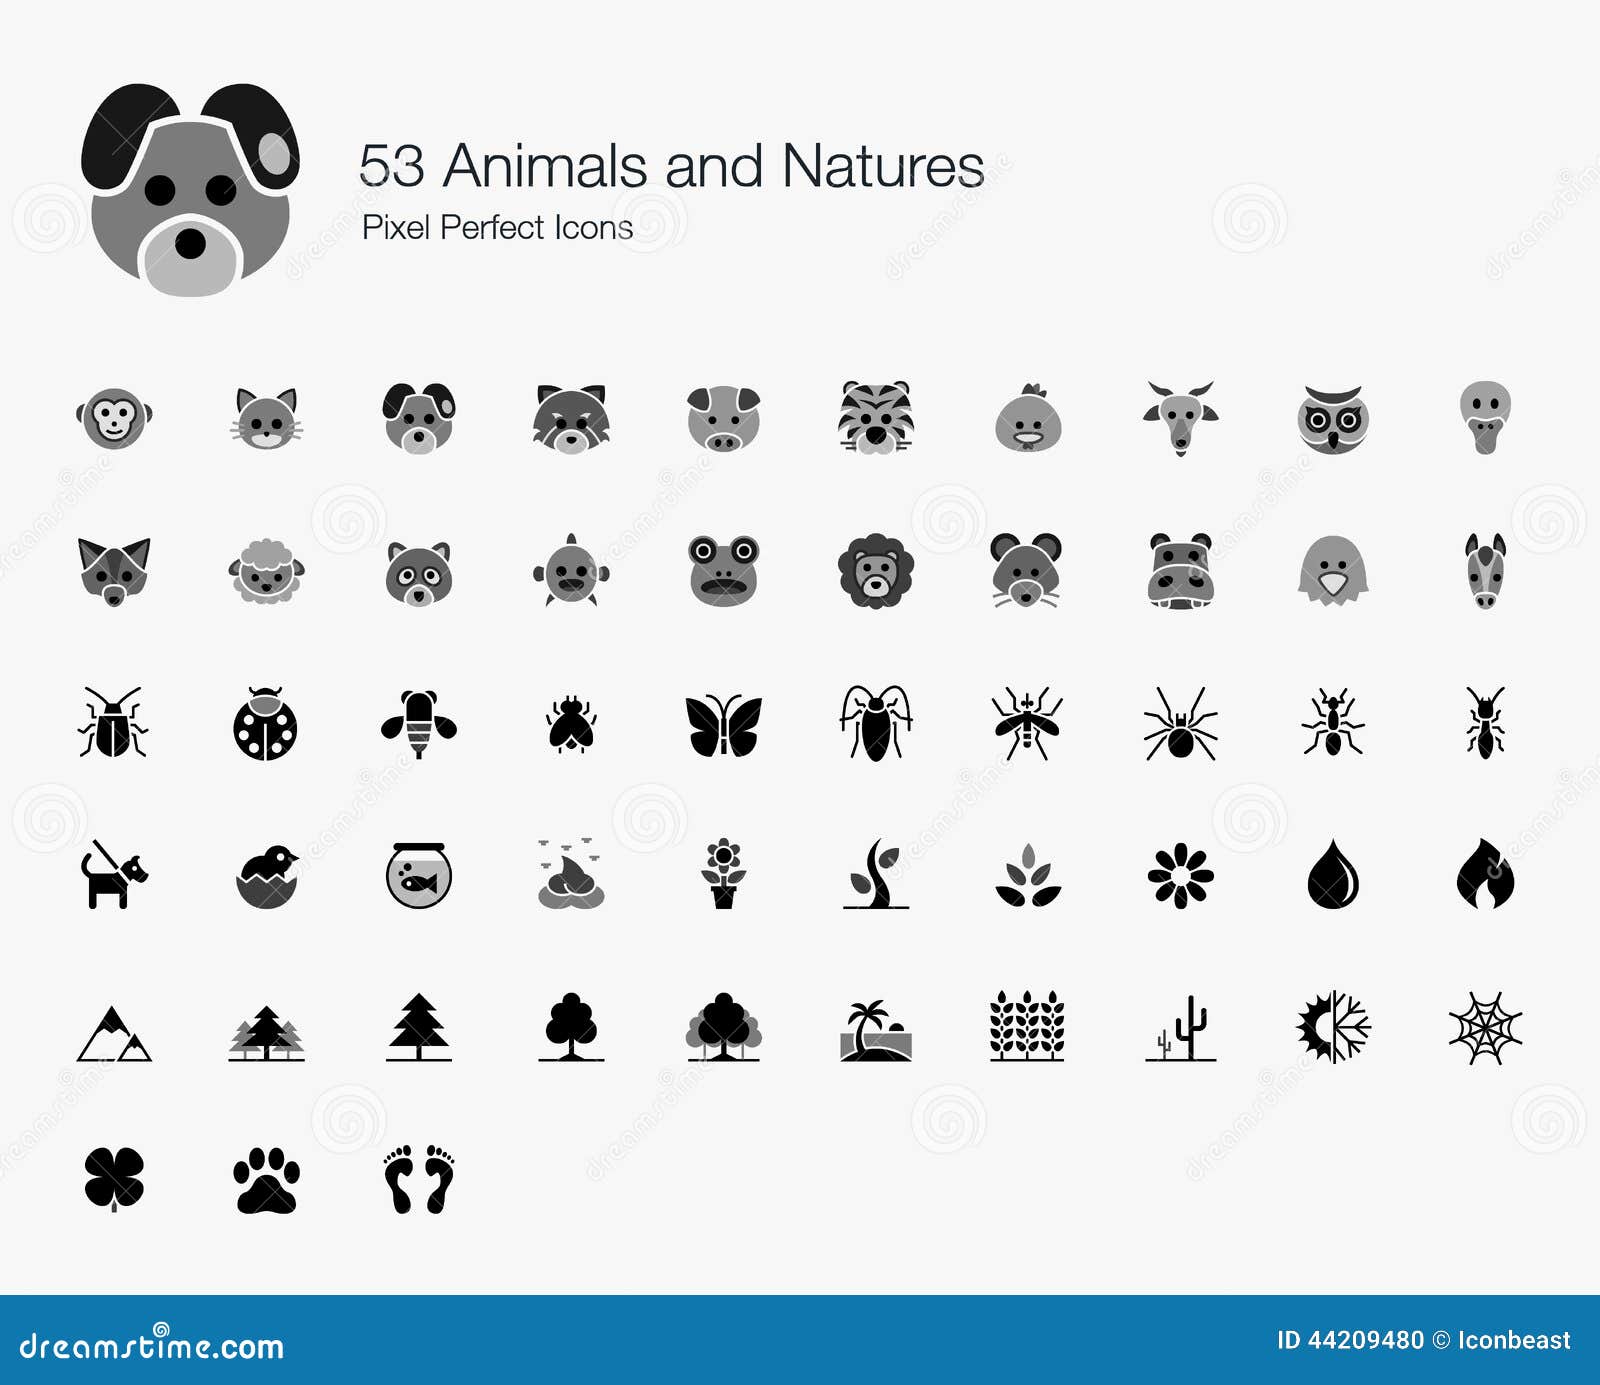 53 animals and natures pixel perfect icons